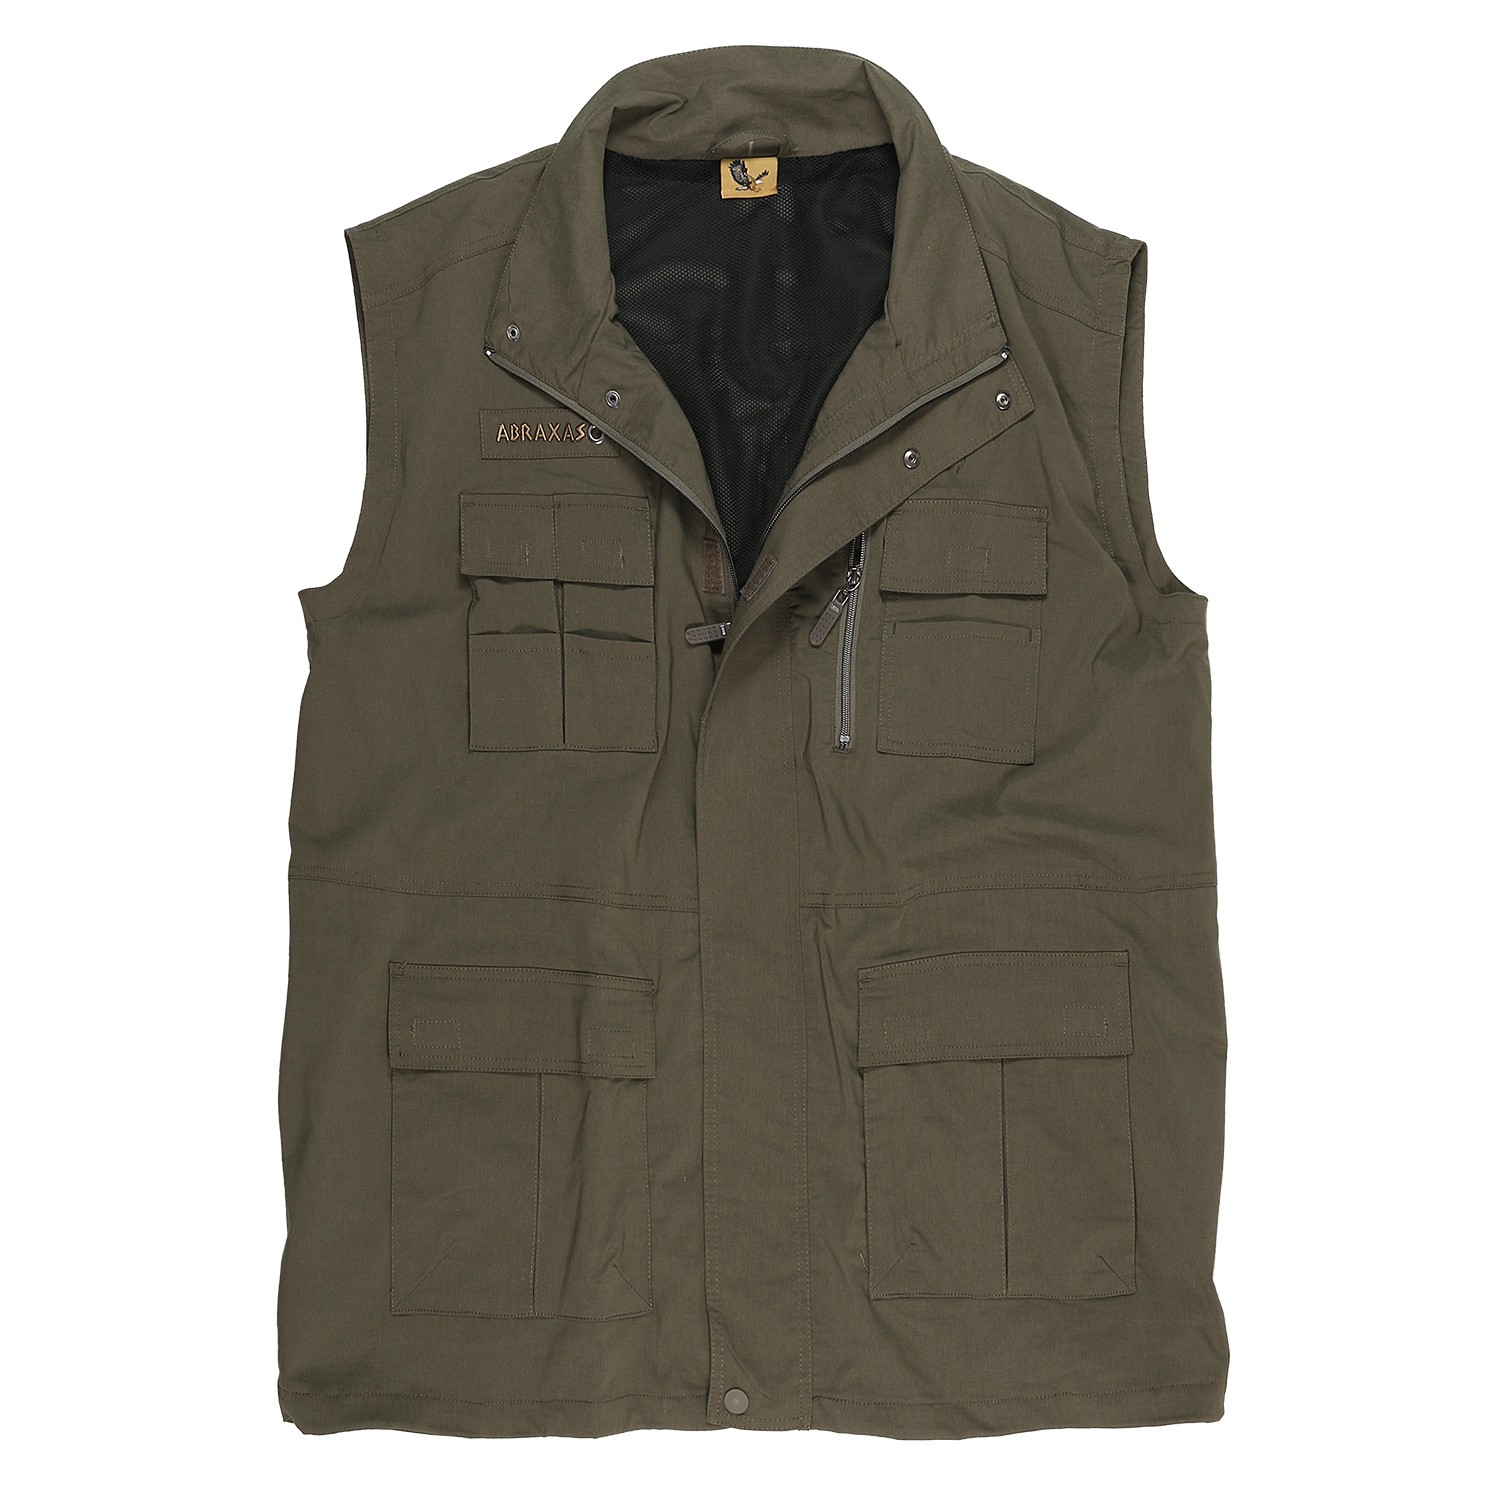 Outdoor vest in khaki by Abraxas in oversizes up to 10XL